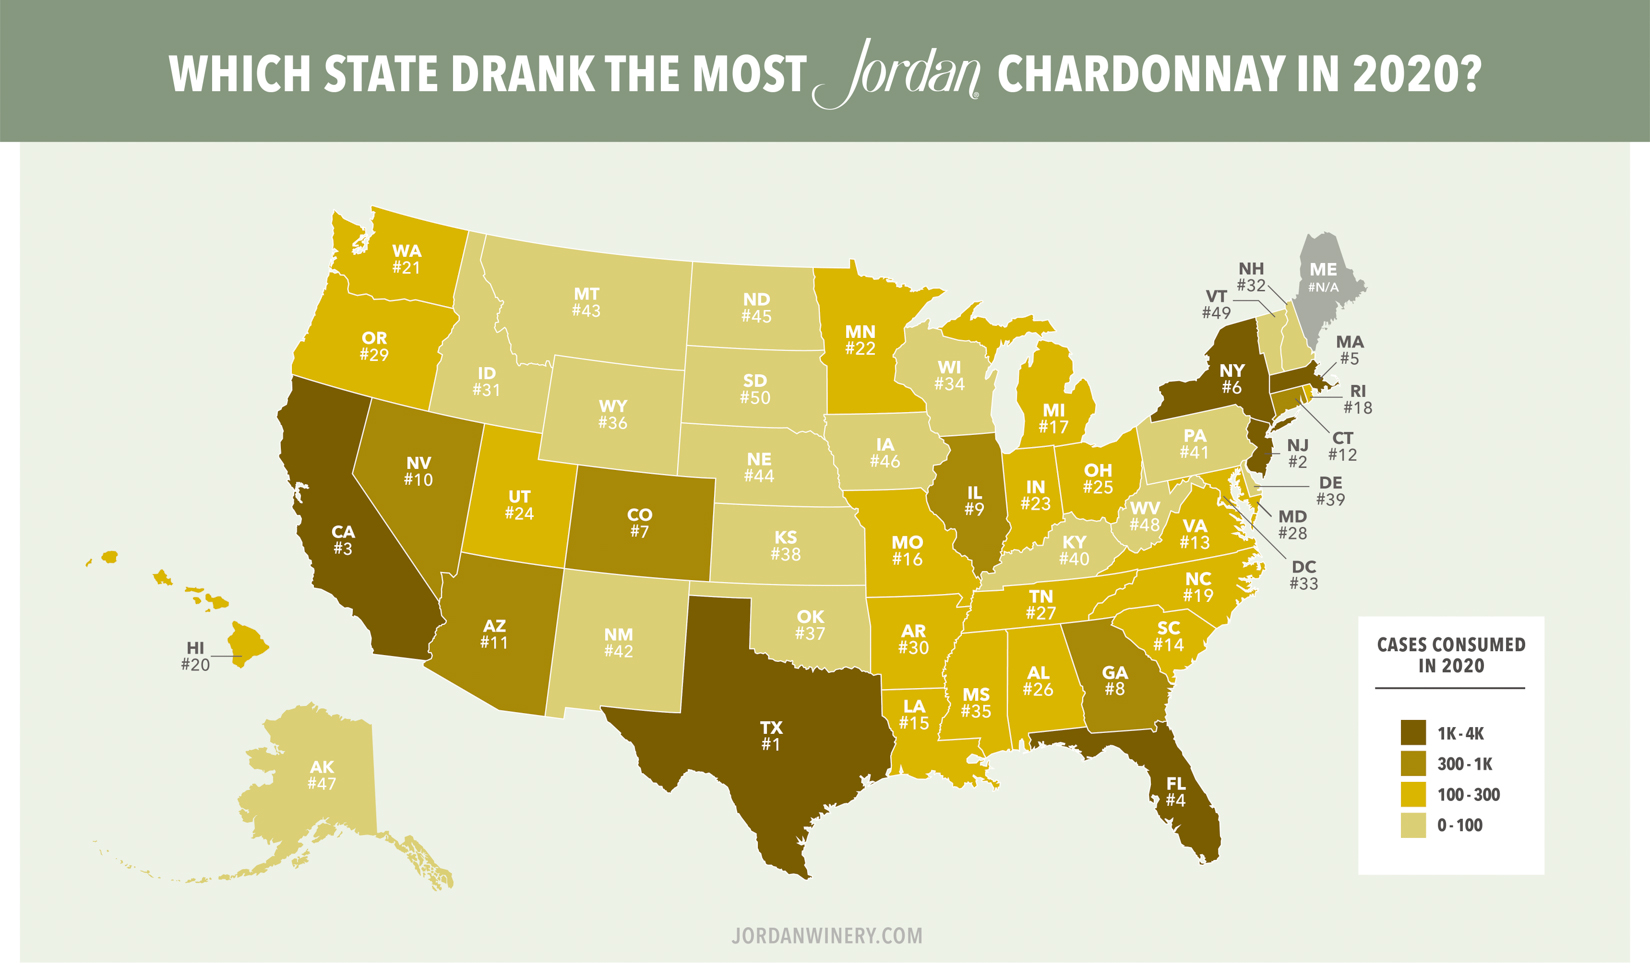 Map showing Jordan Chardonnay wine cases purchased by state